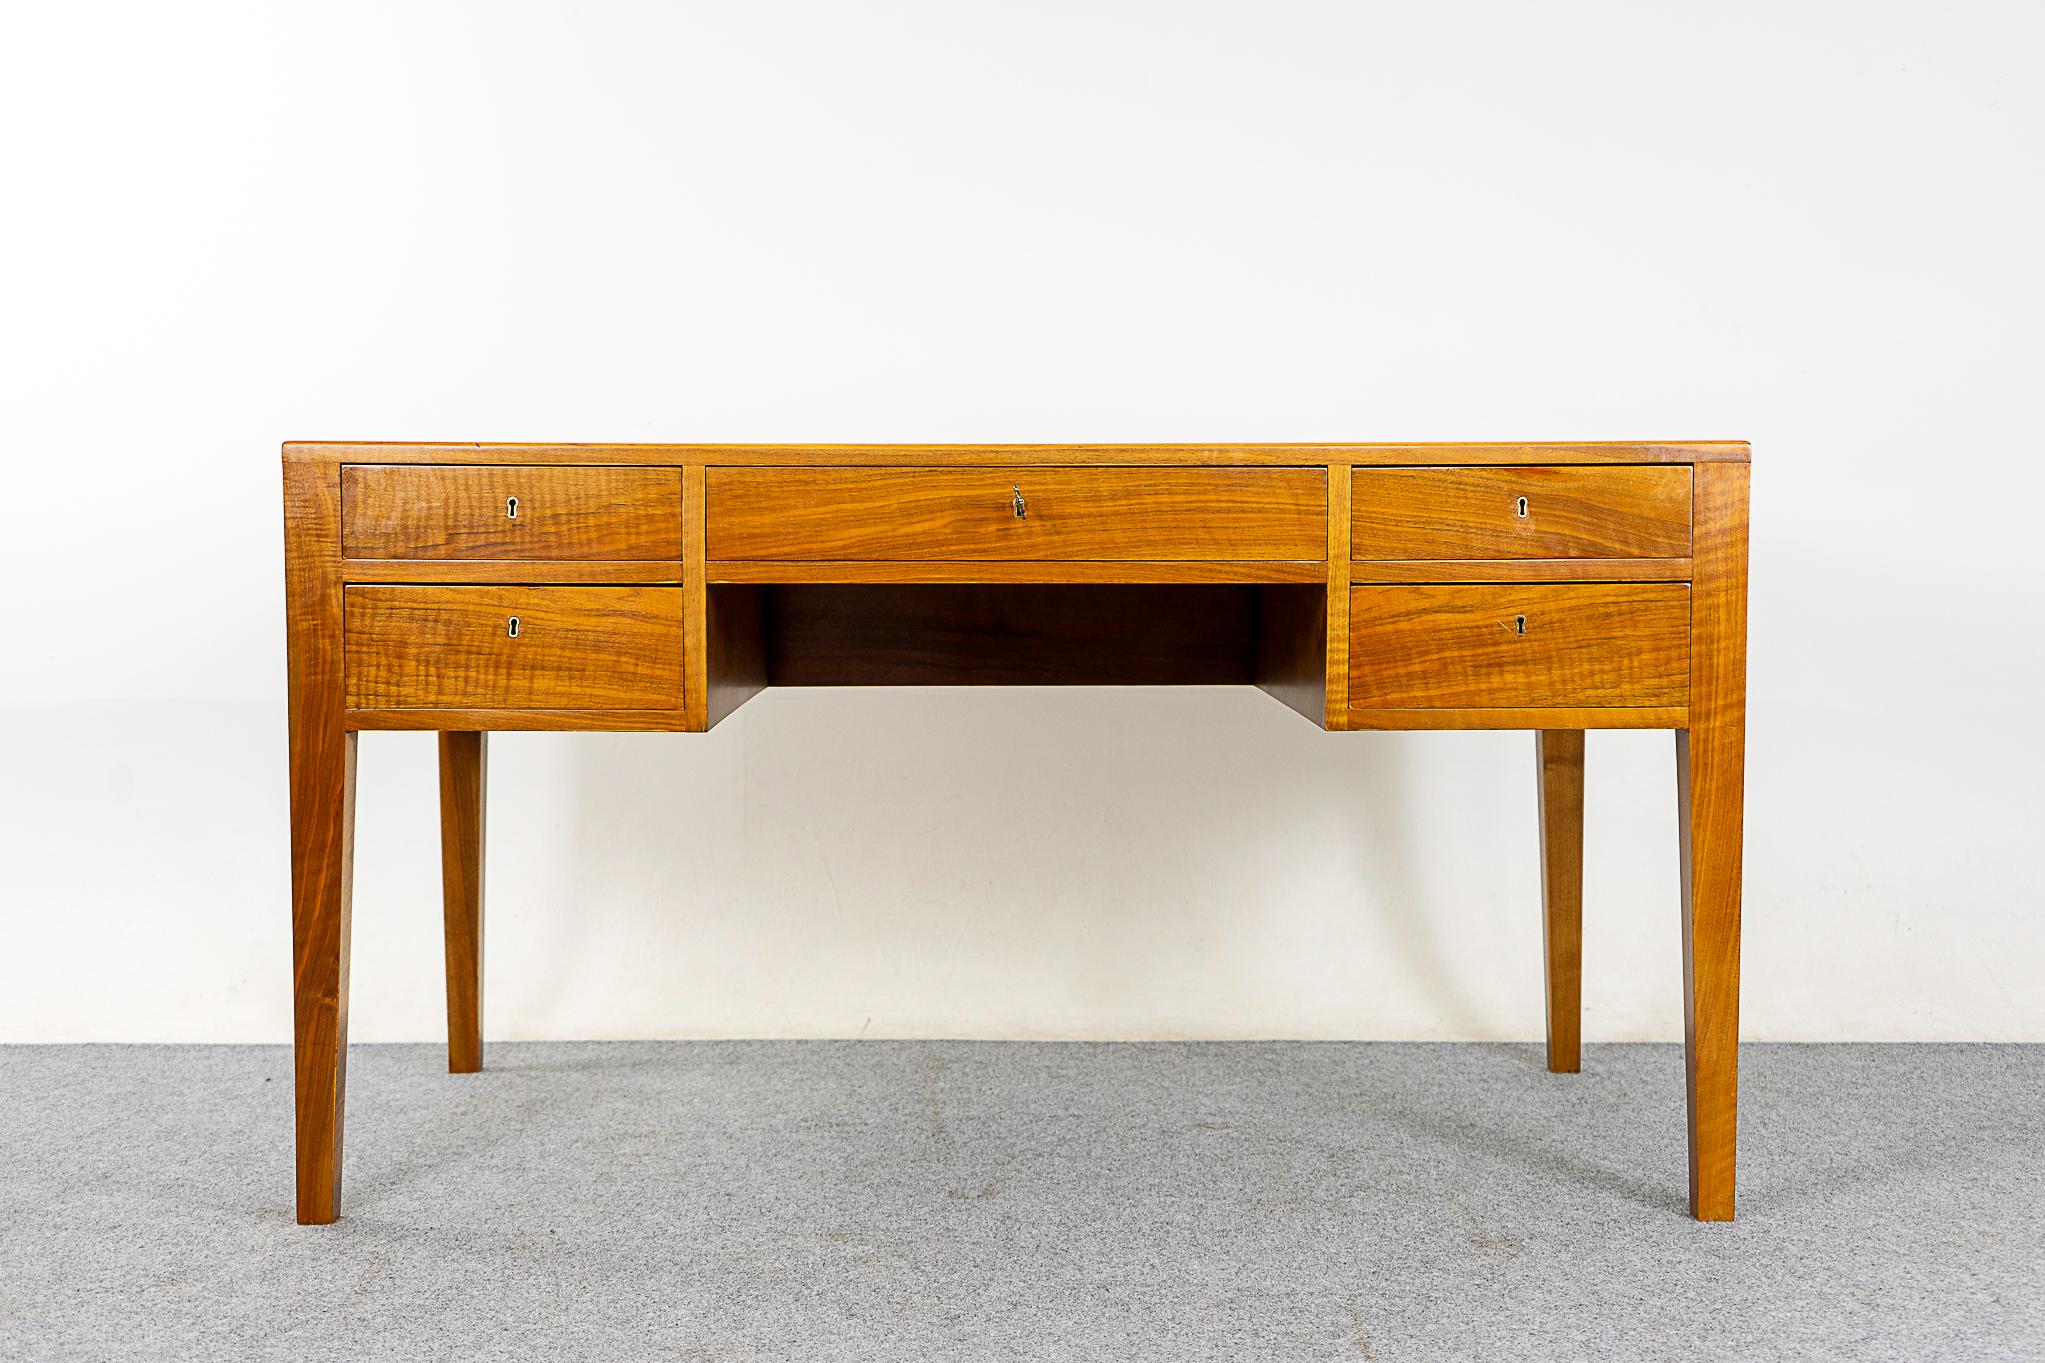 Walnut mid-century desk, circa 1960's. Clean modern lines with stunning grain patterns on the top! Finished on both sides, can be placed in the center of a room and look fantastic from every angle.

Please inquire for remote and international